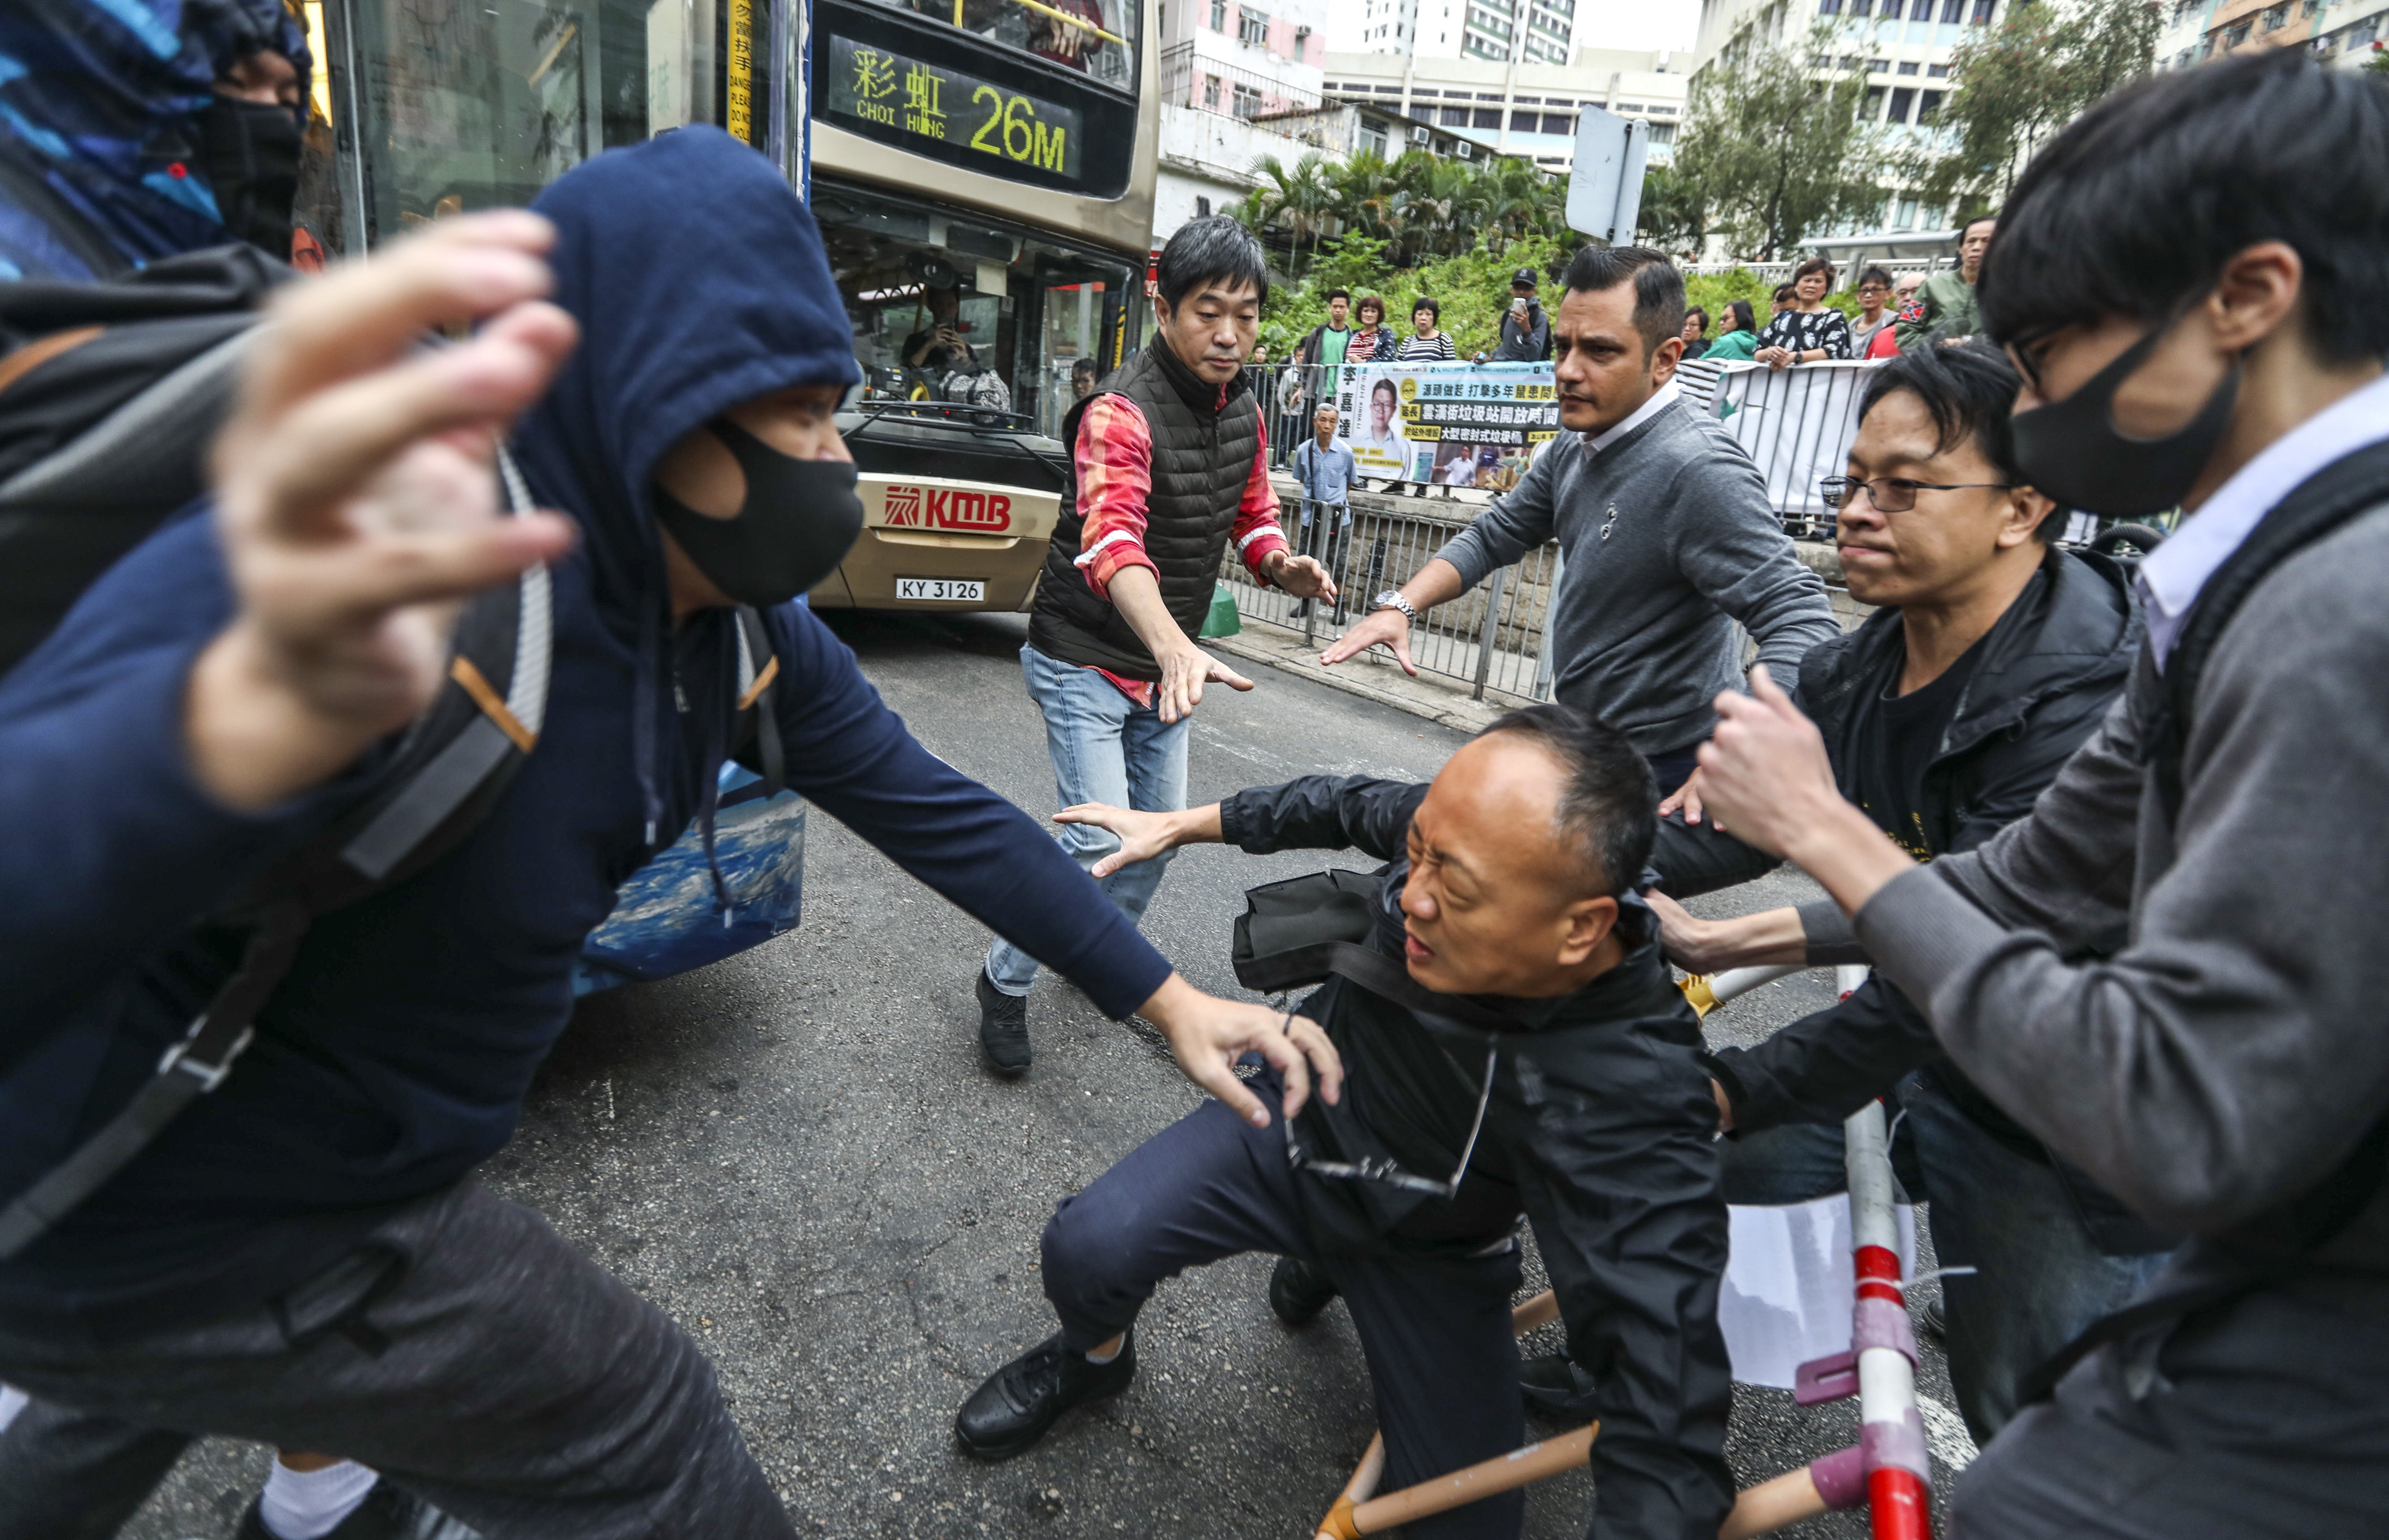 Scuffles break out between protesters and those who oppose them in Kwun Tong on November 20. Photo: Xiaomei Chen